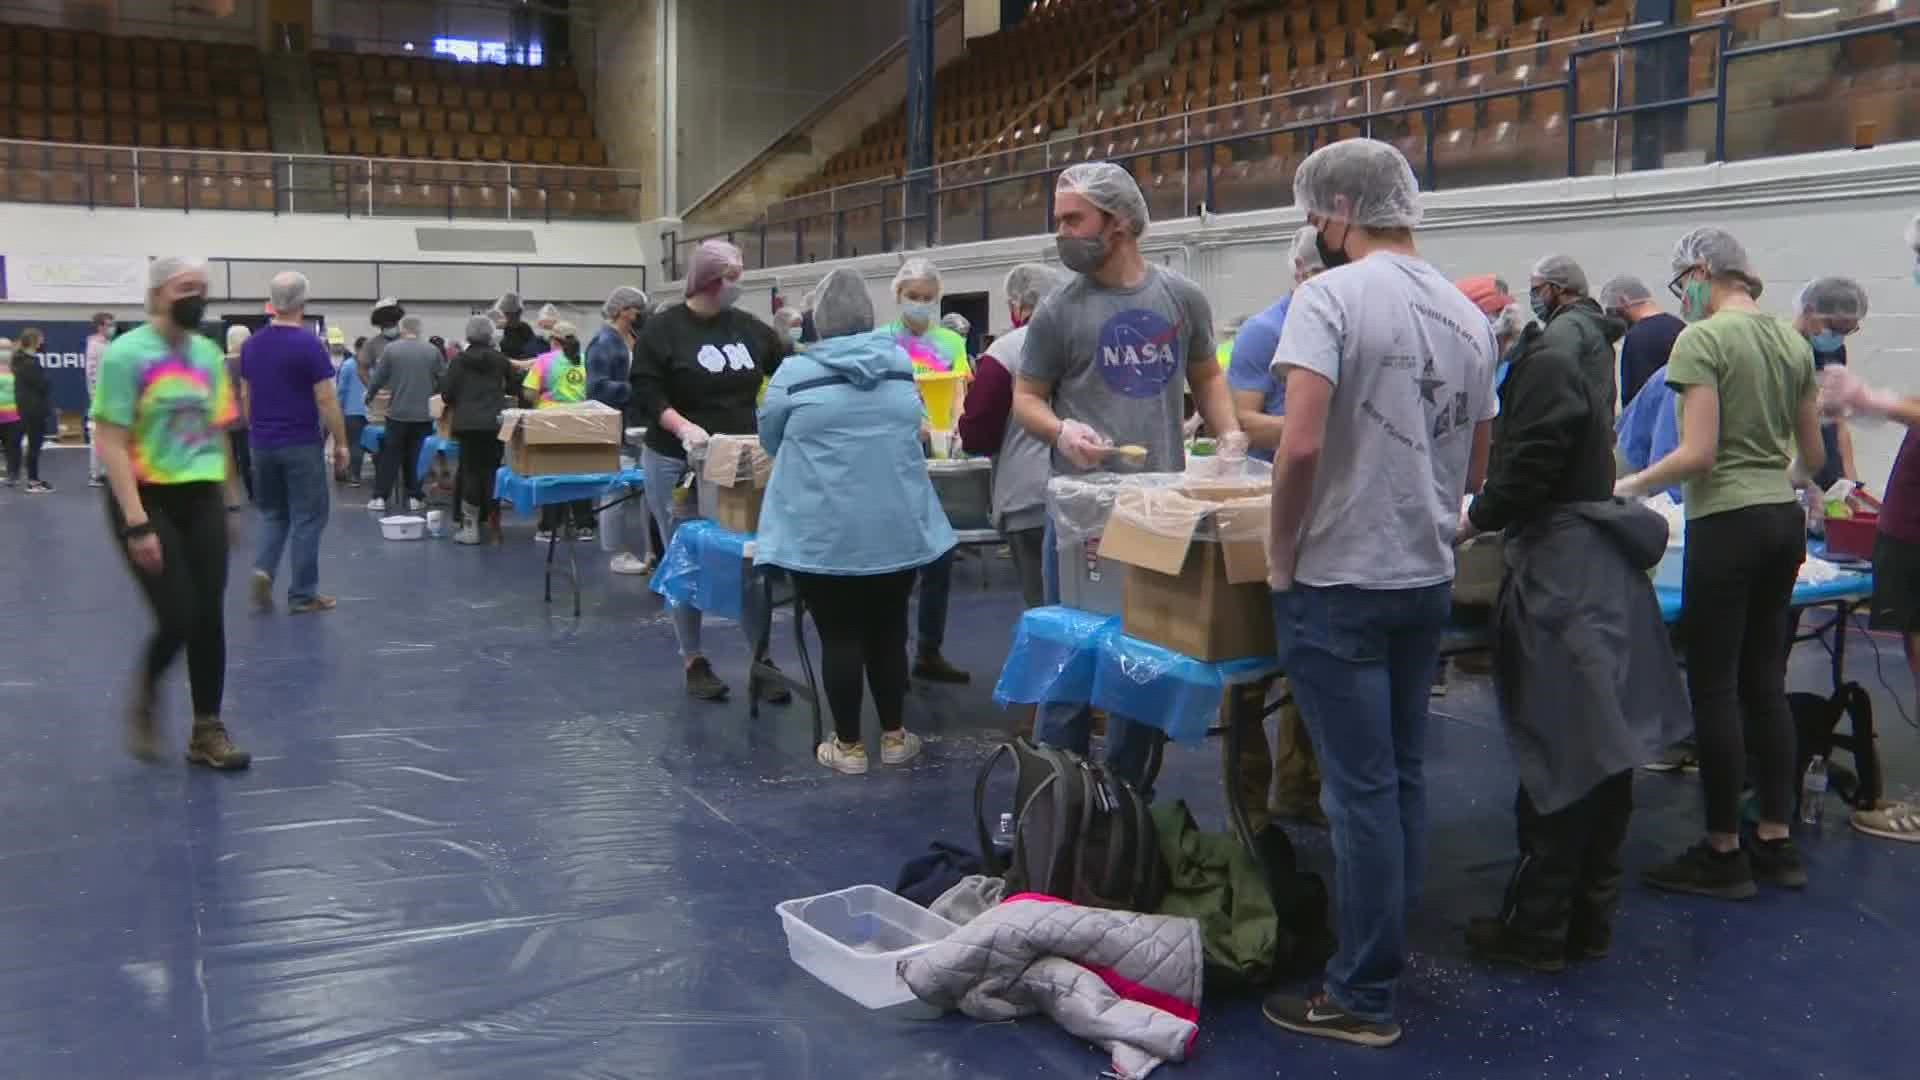 Students, faculty, staff and coaches all volunteered their time Wednesday to pack more than 50,000 meals for food banks across the state.